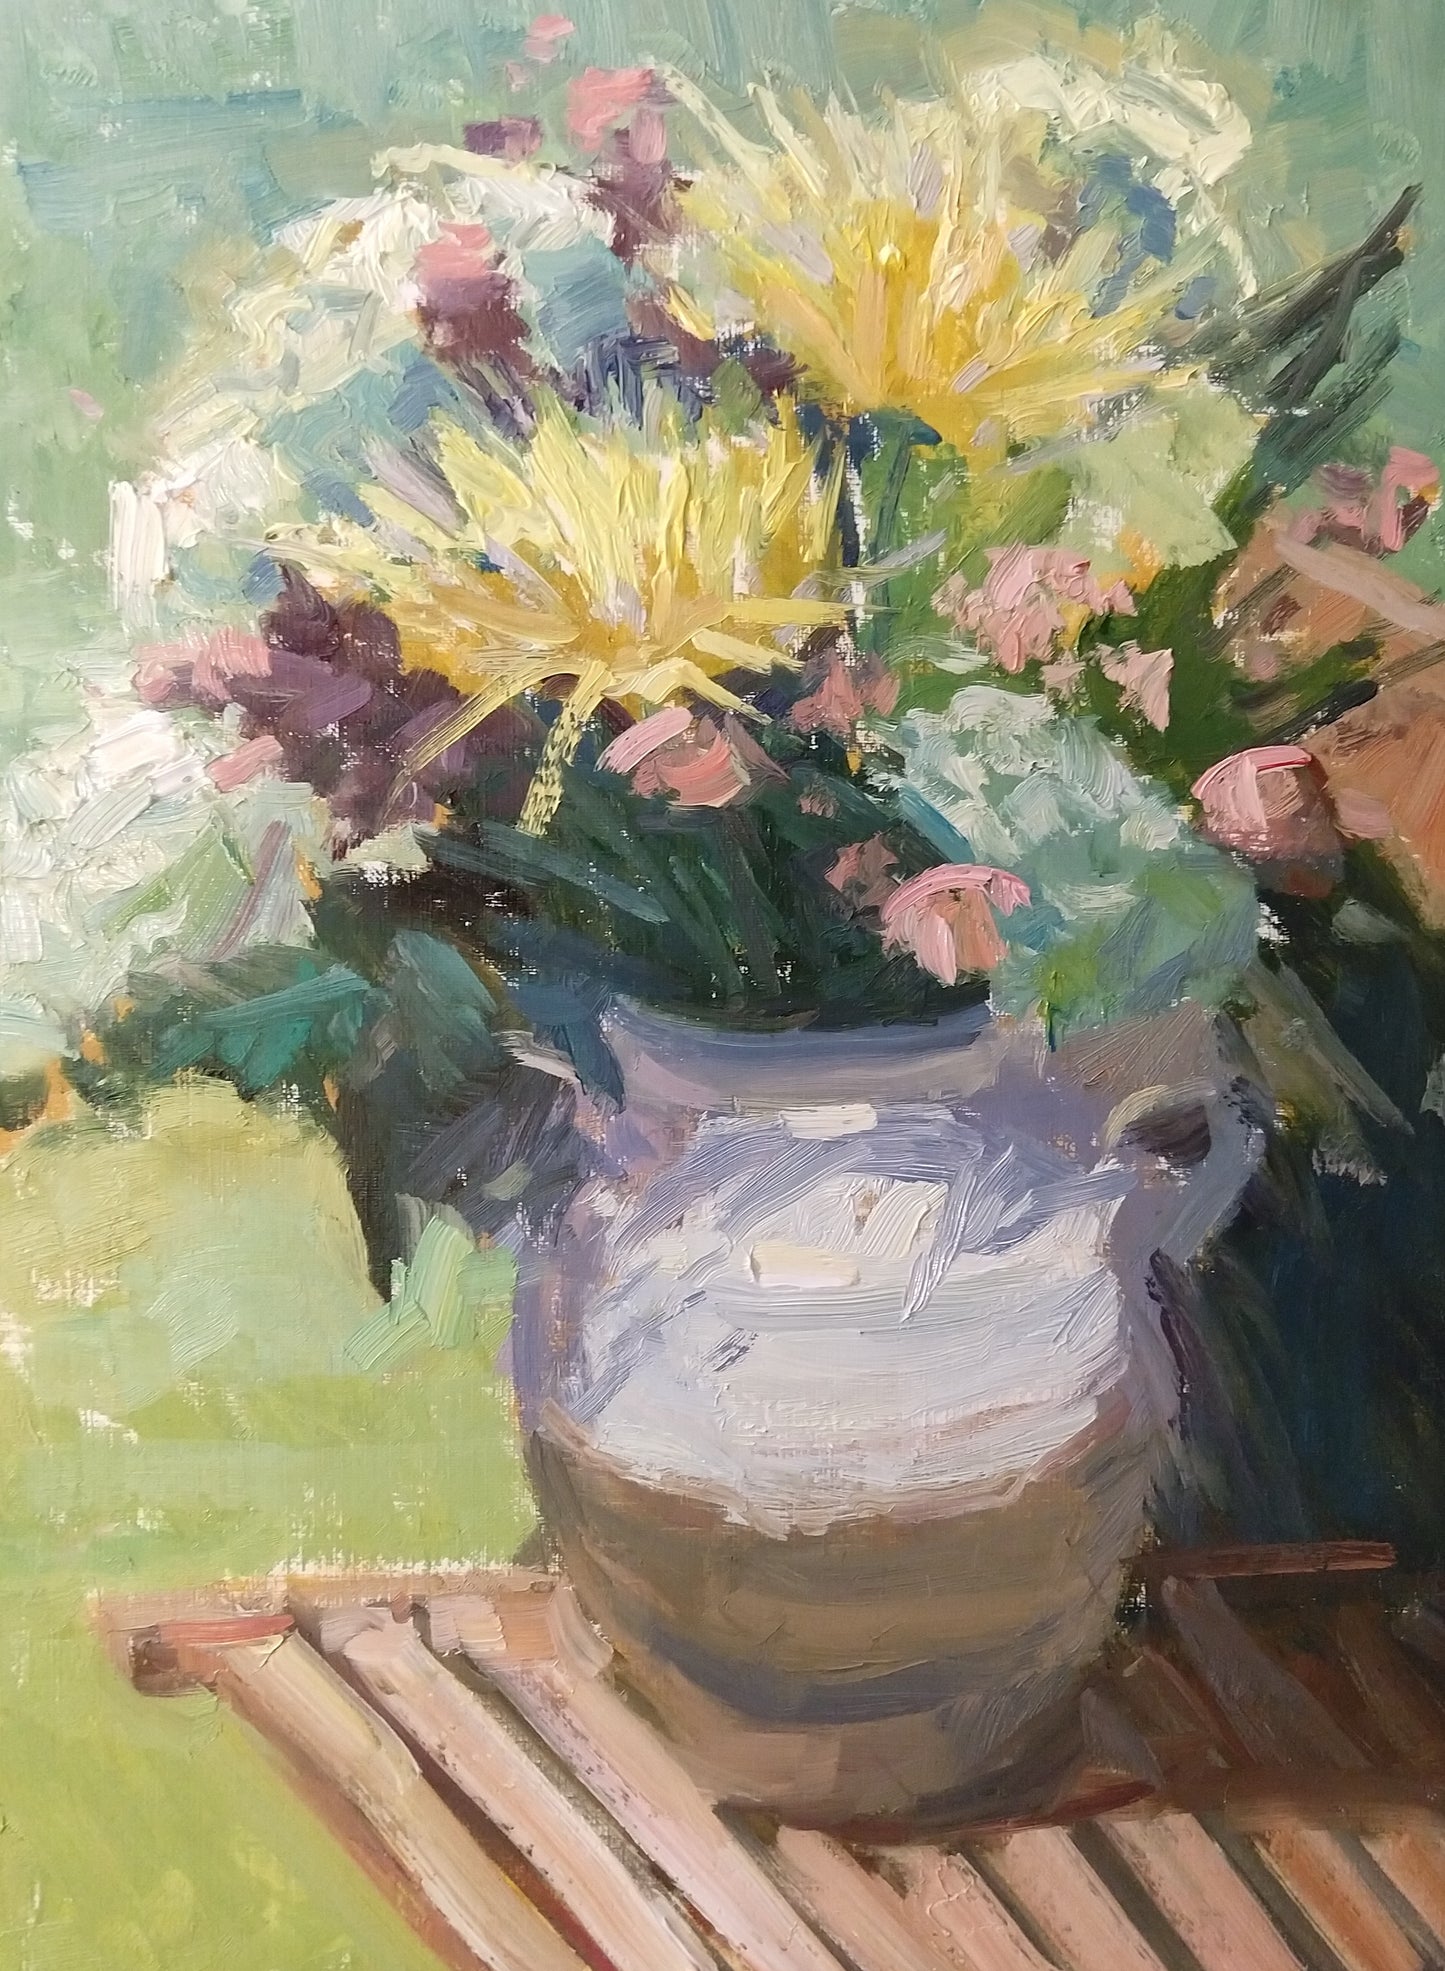 "Petals & Pottery" 16x12 Original Oil Painting by Artist Kristina Sellers